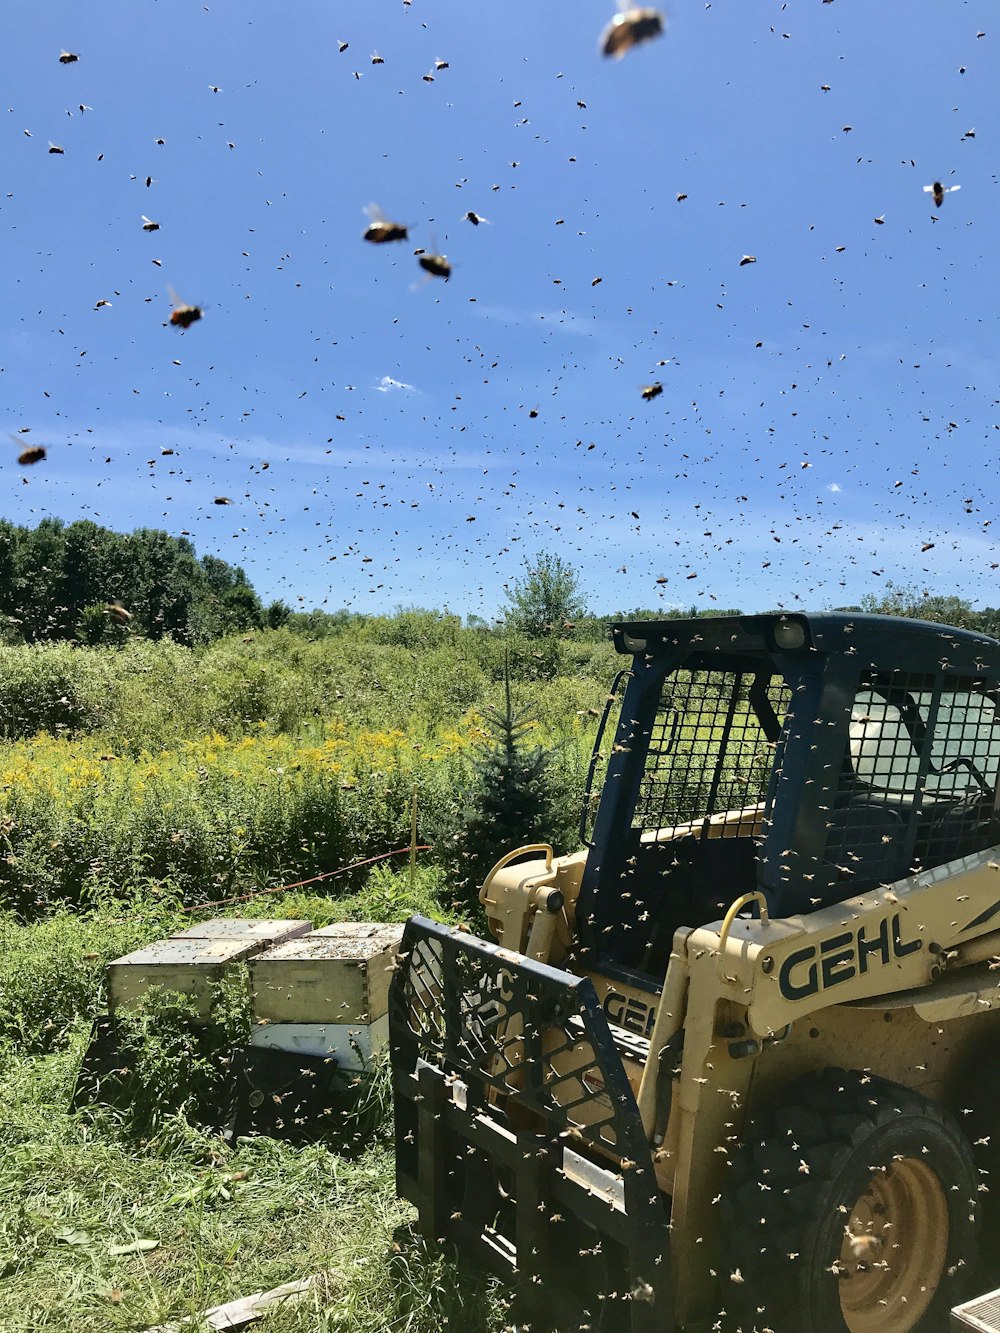 a yellow skid steer driving through a field